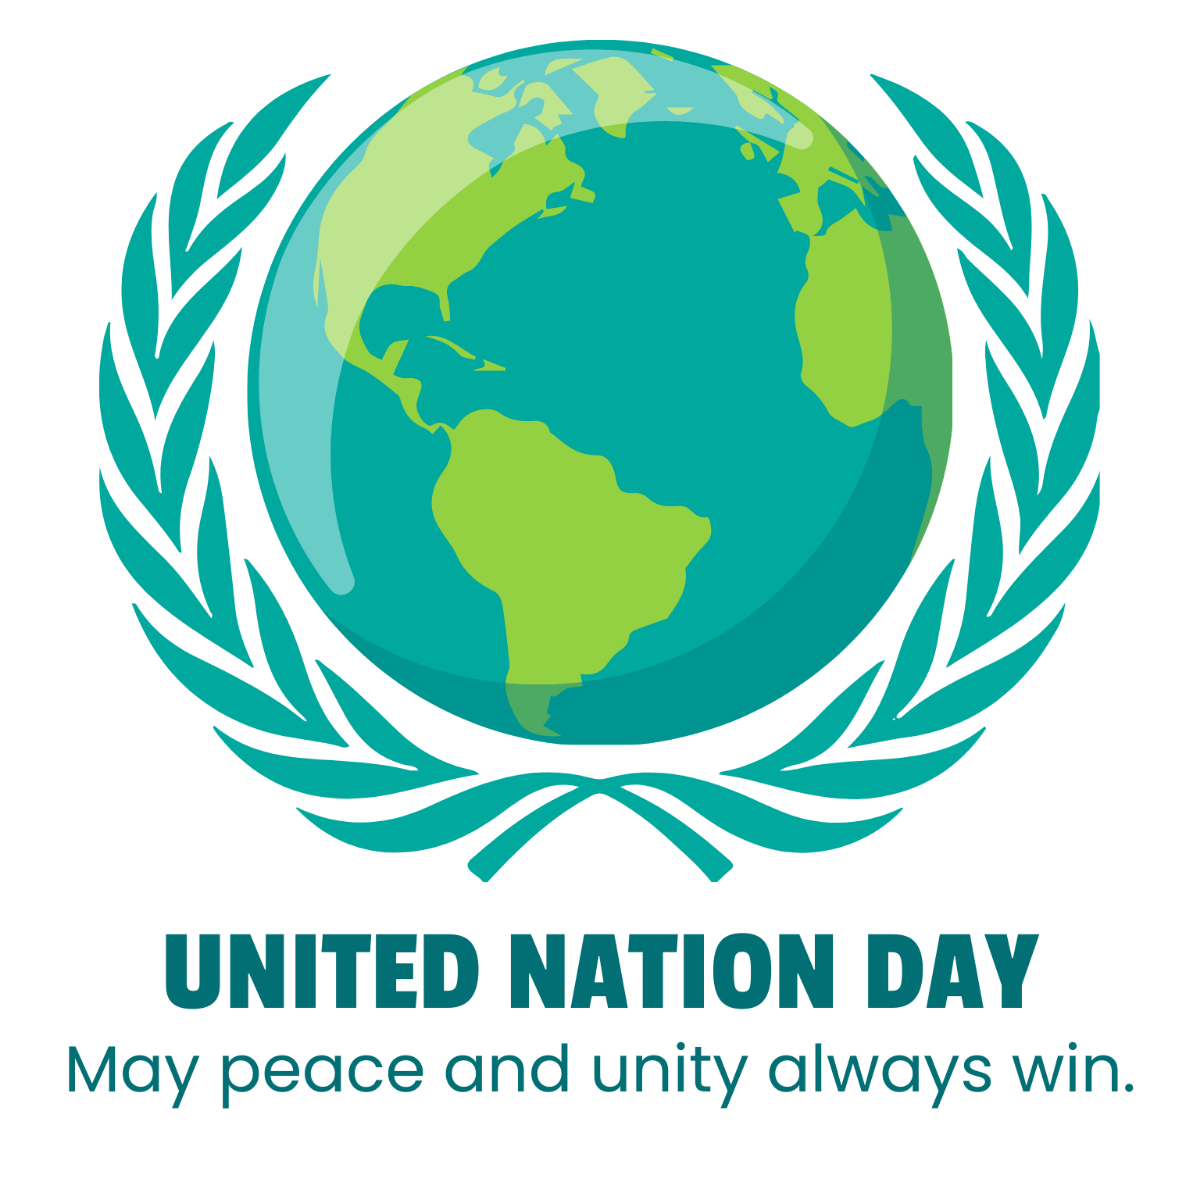 Free United Nations Day Wishes Vector Template